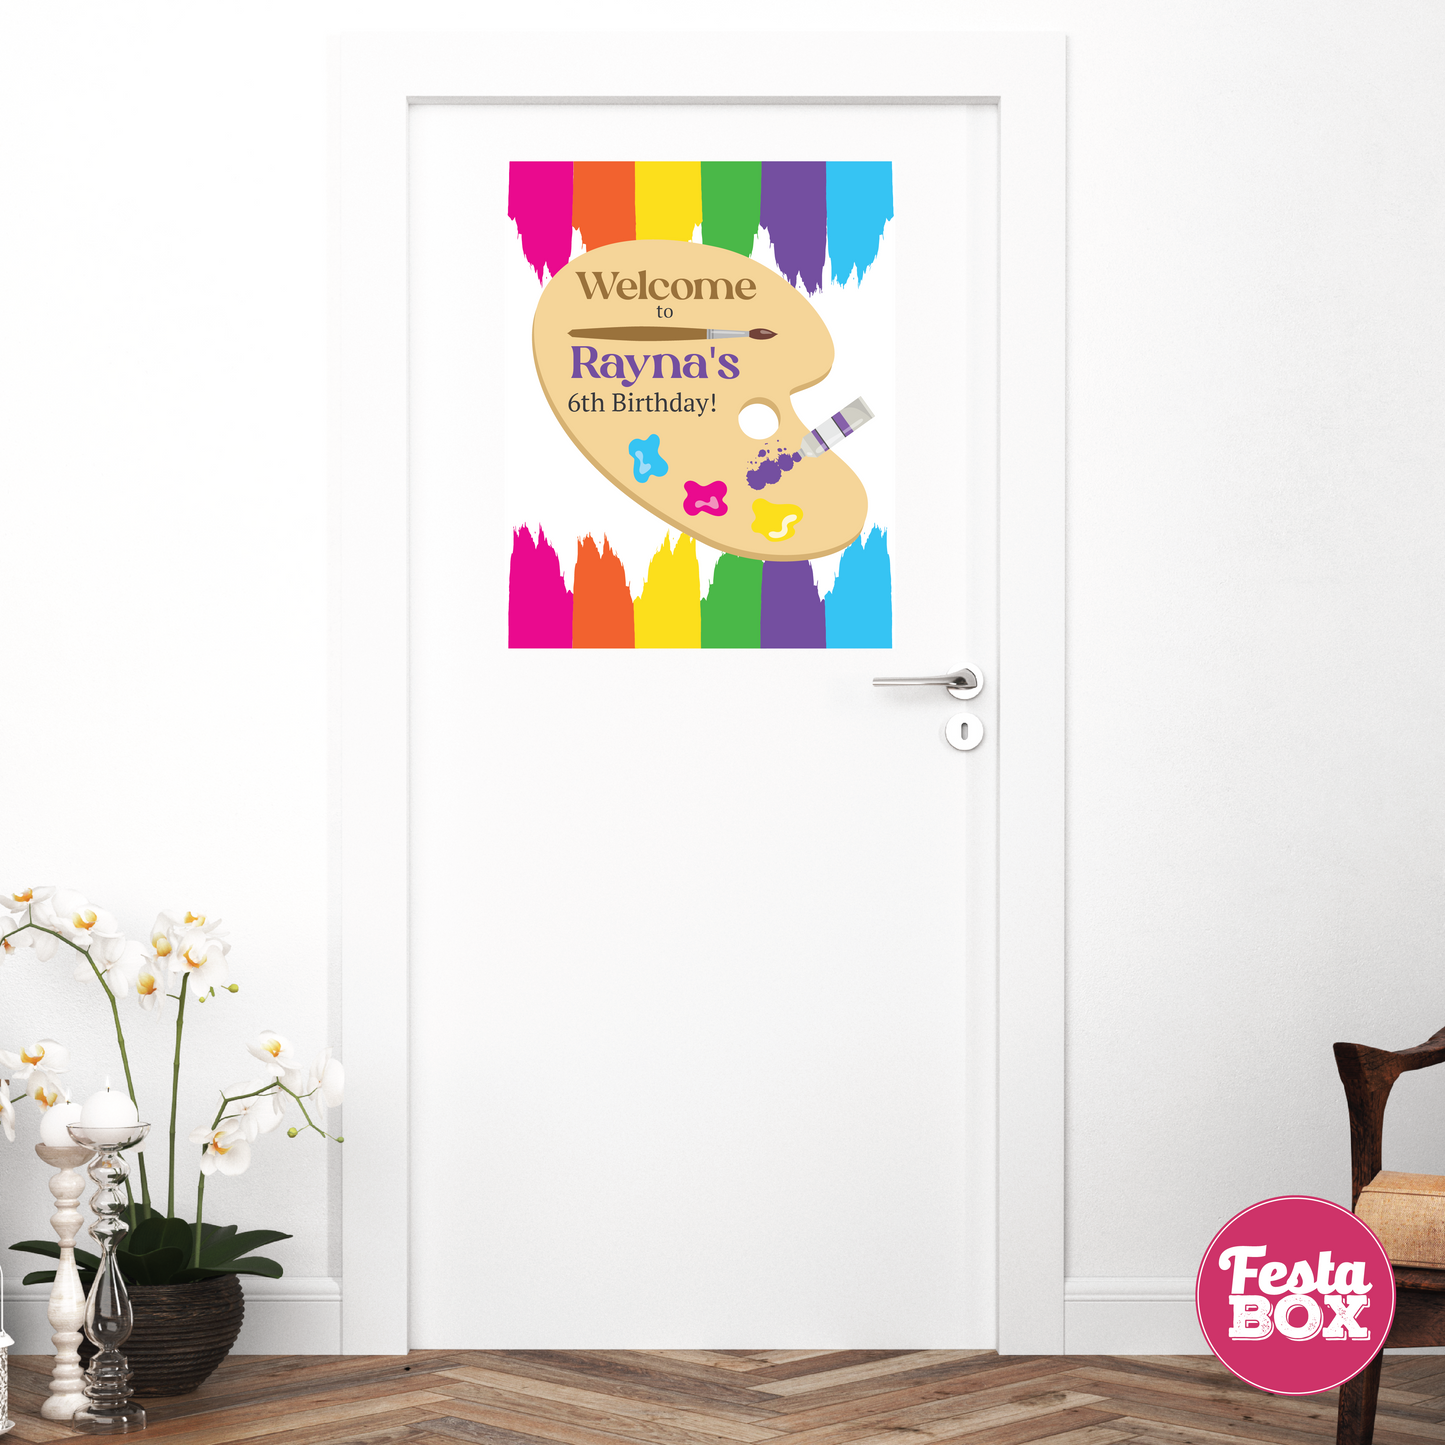 Welcome Sign for Baby Shower – Arts Theme by Festabox